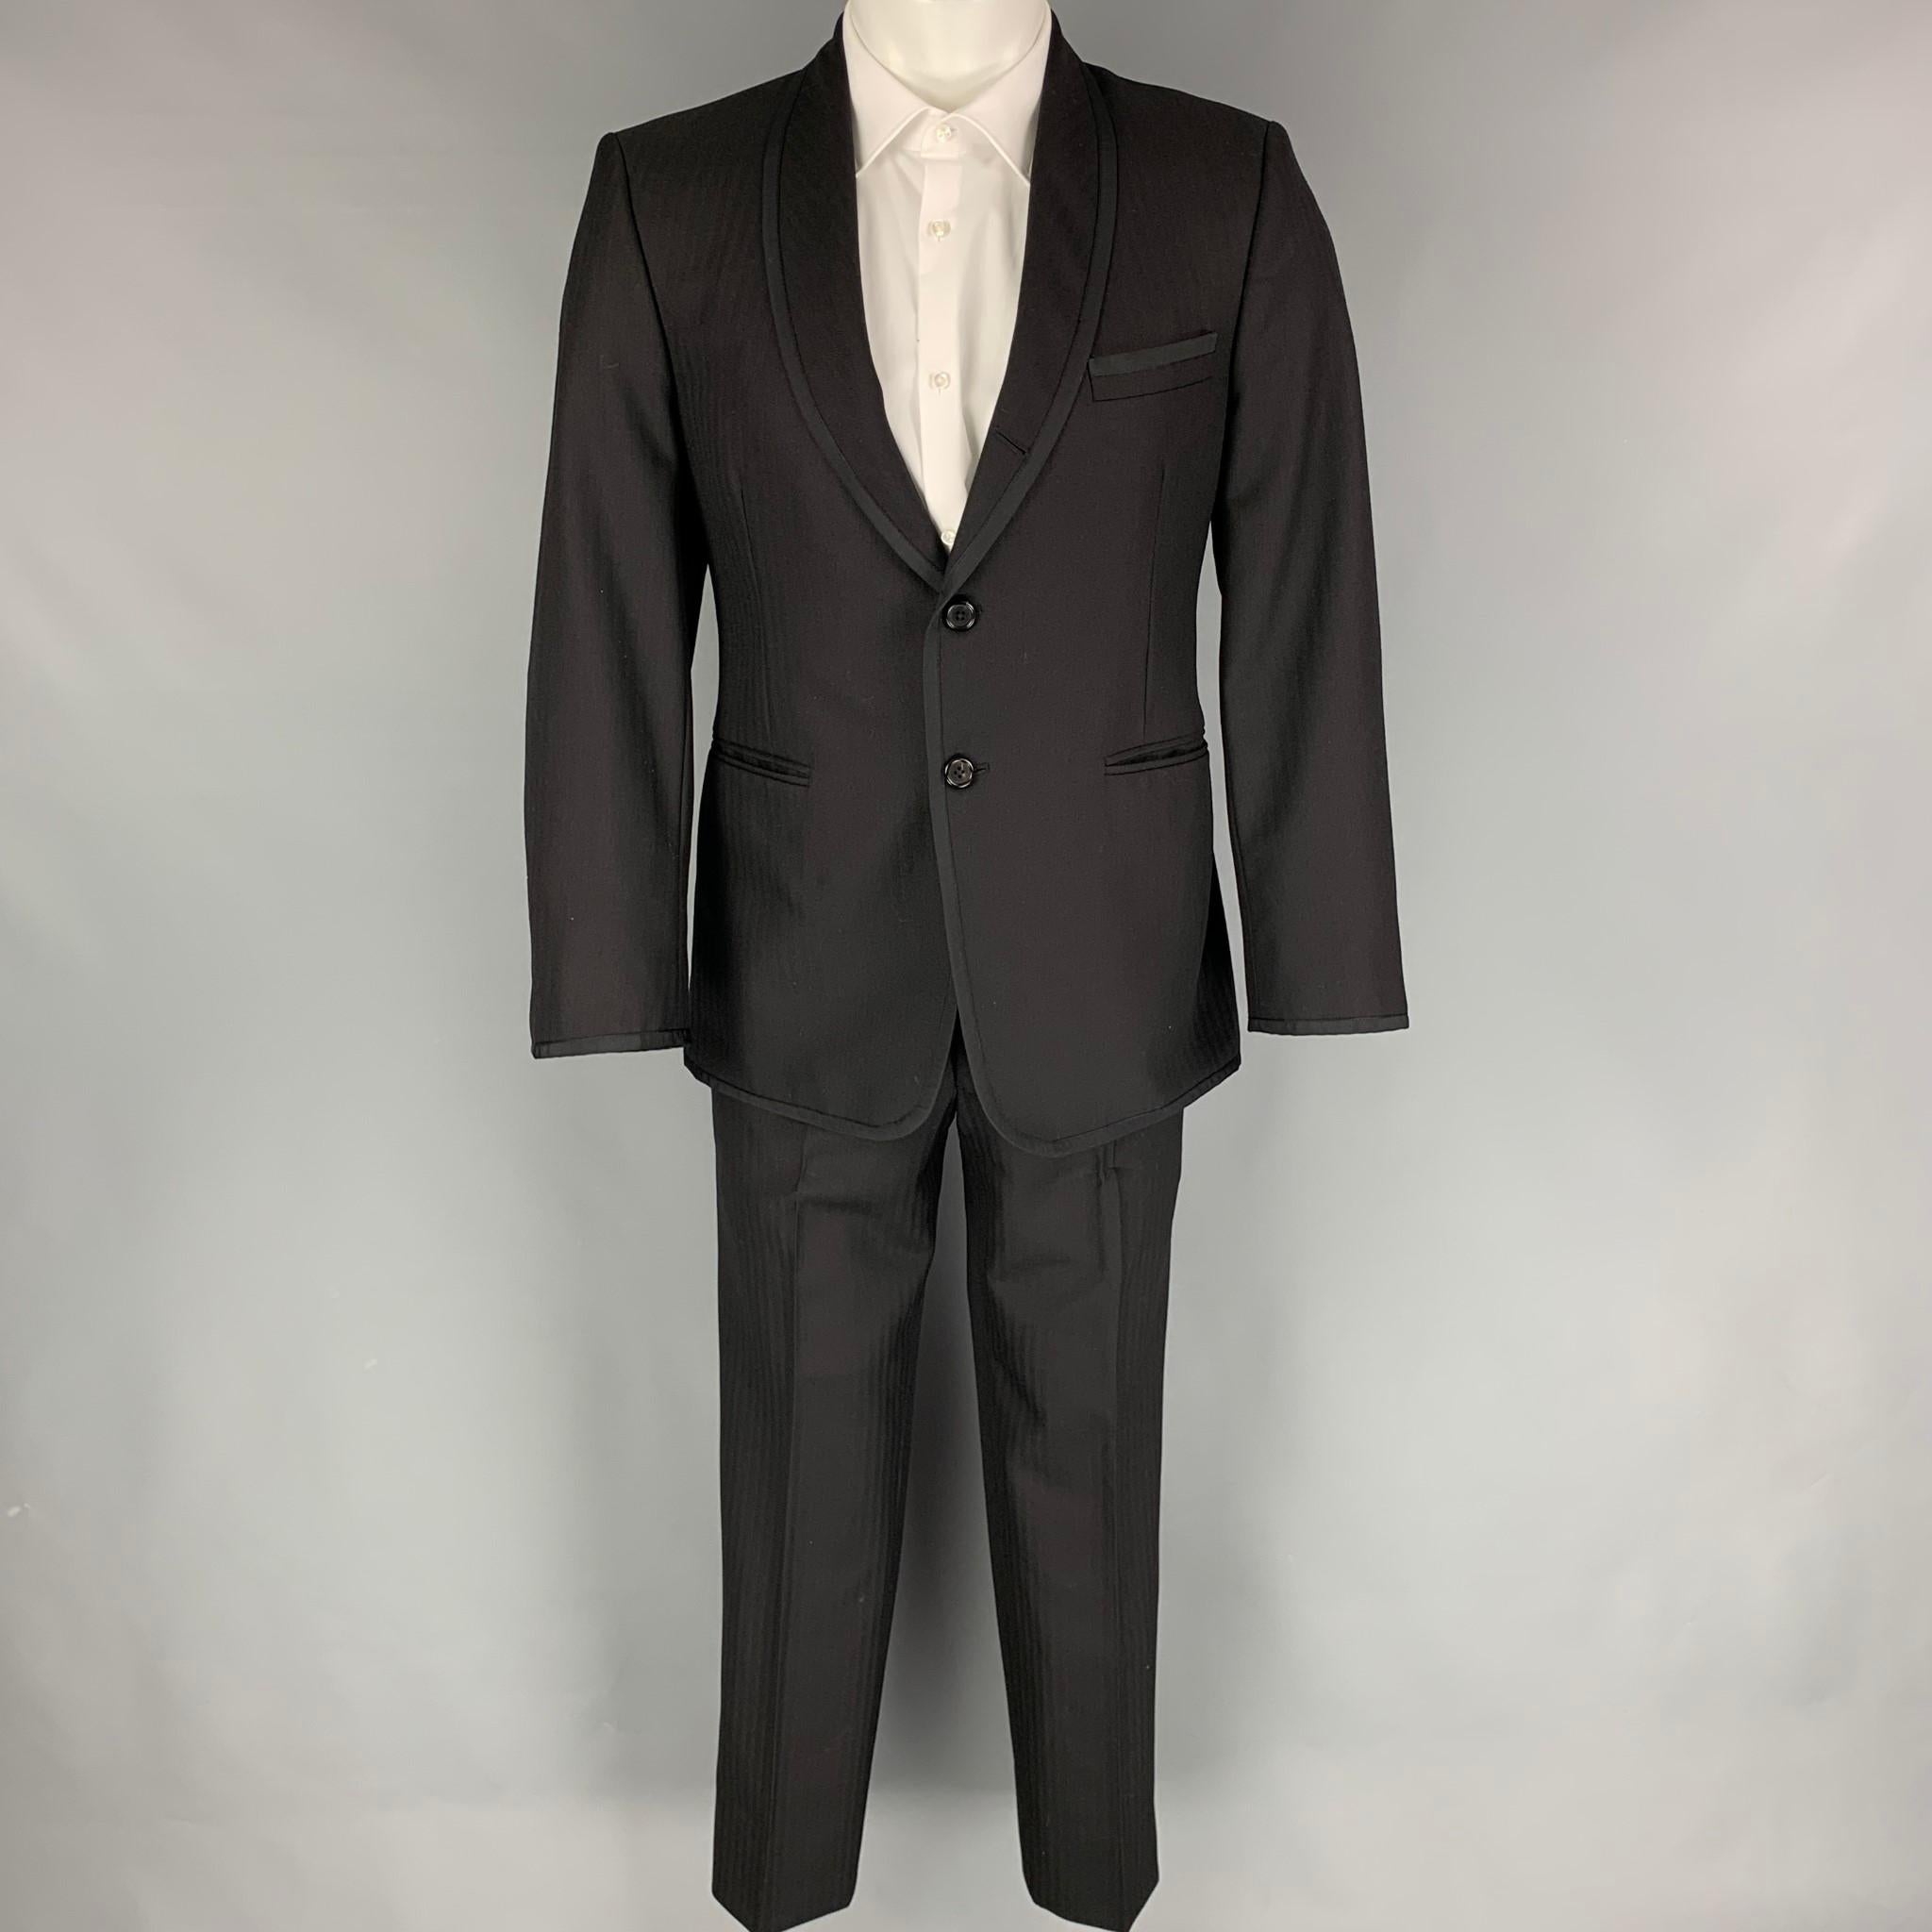 THOM BROWNE for NEIMAN MARCUS tuxedo suit comes in a black on black herringbone material with a full liner and includes a single breasted, three button sport coat with a shawl lapel and matching pleated front trousers. Handmade in USA.

Excellent